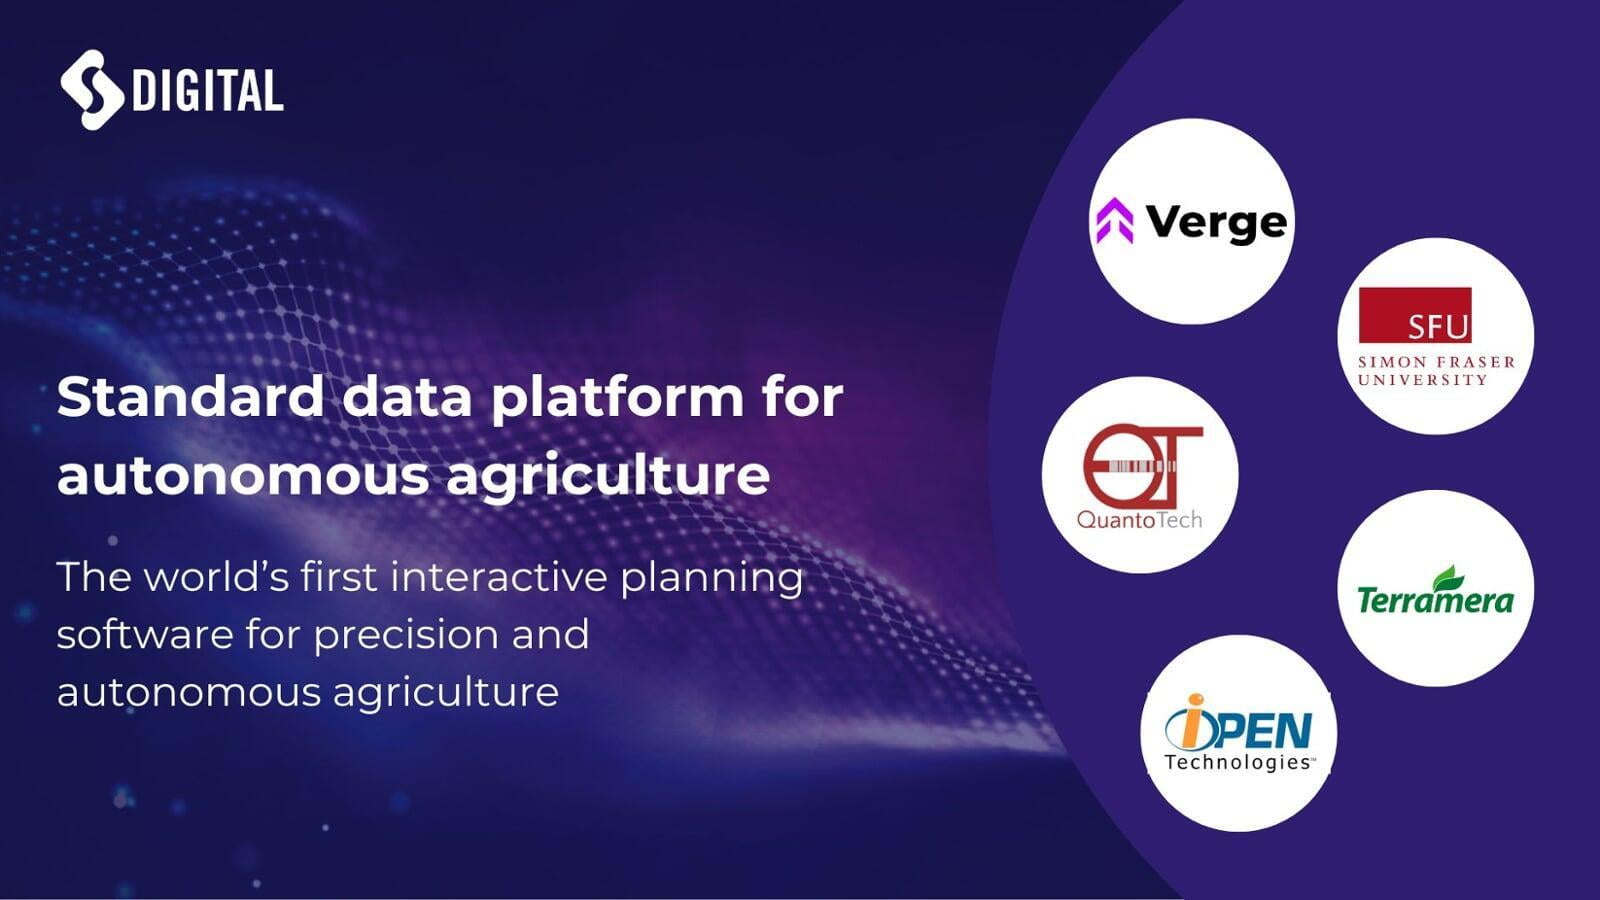 Canada's Digital Supercluster invests in Verge's innovative agtech platform to enable autonomous, sustainable farming